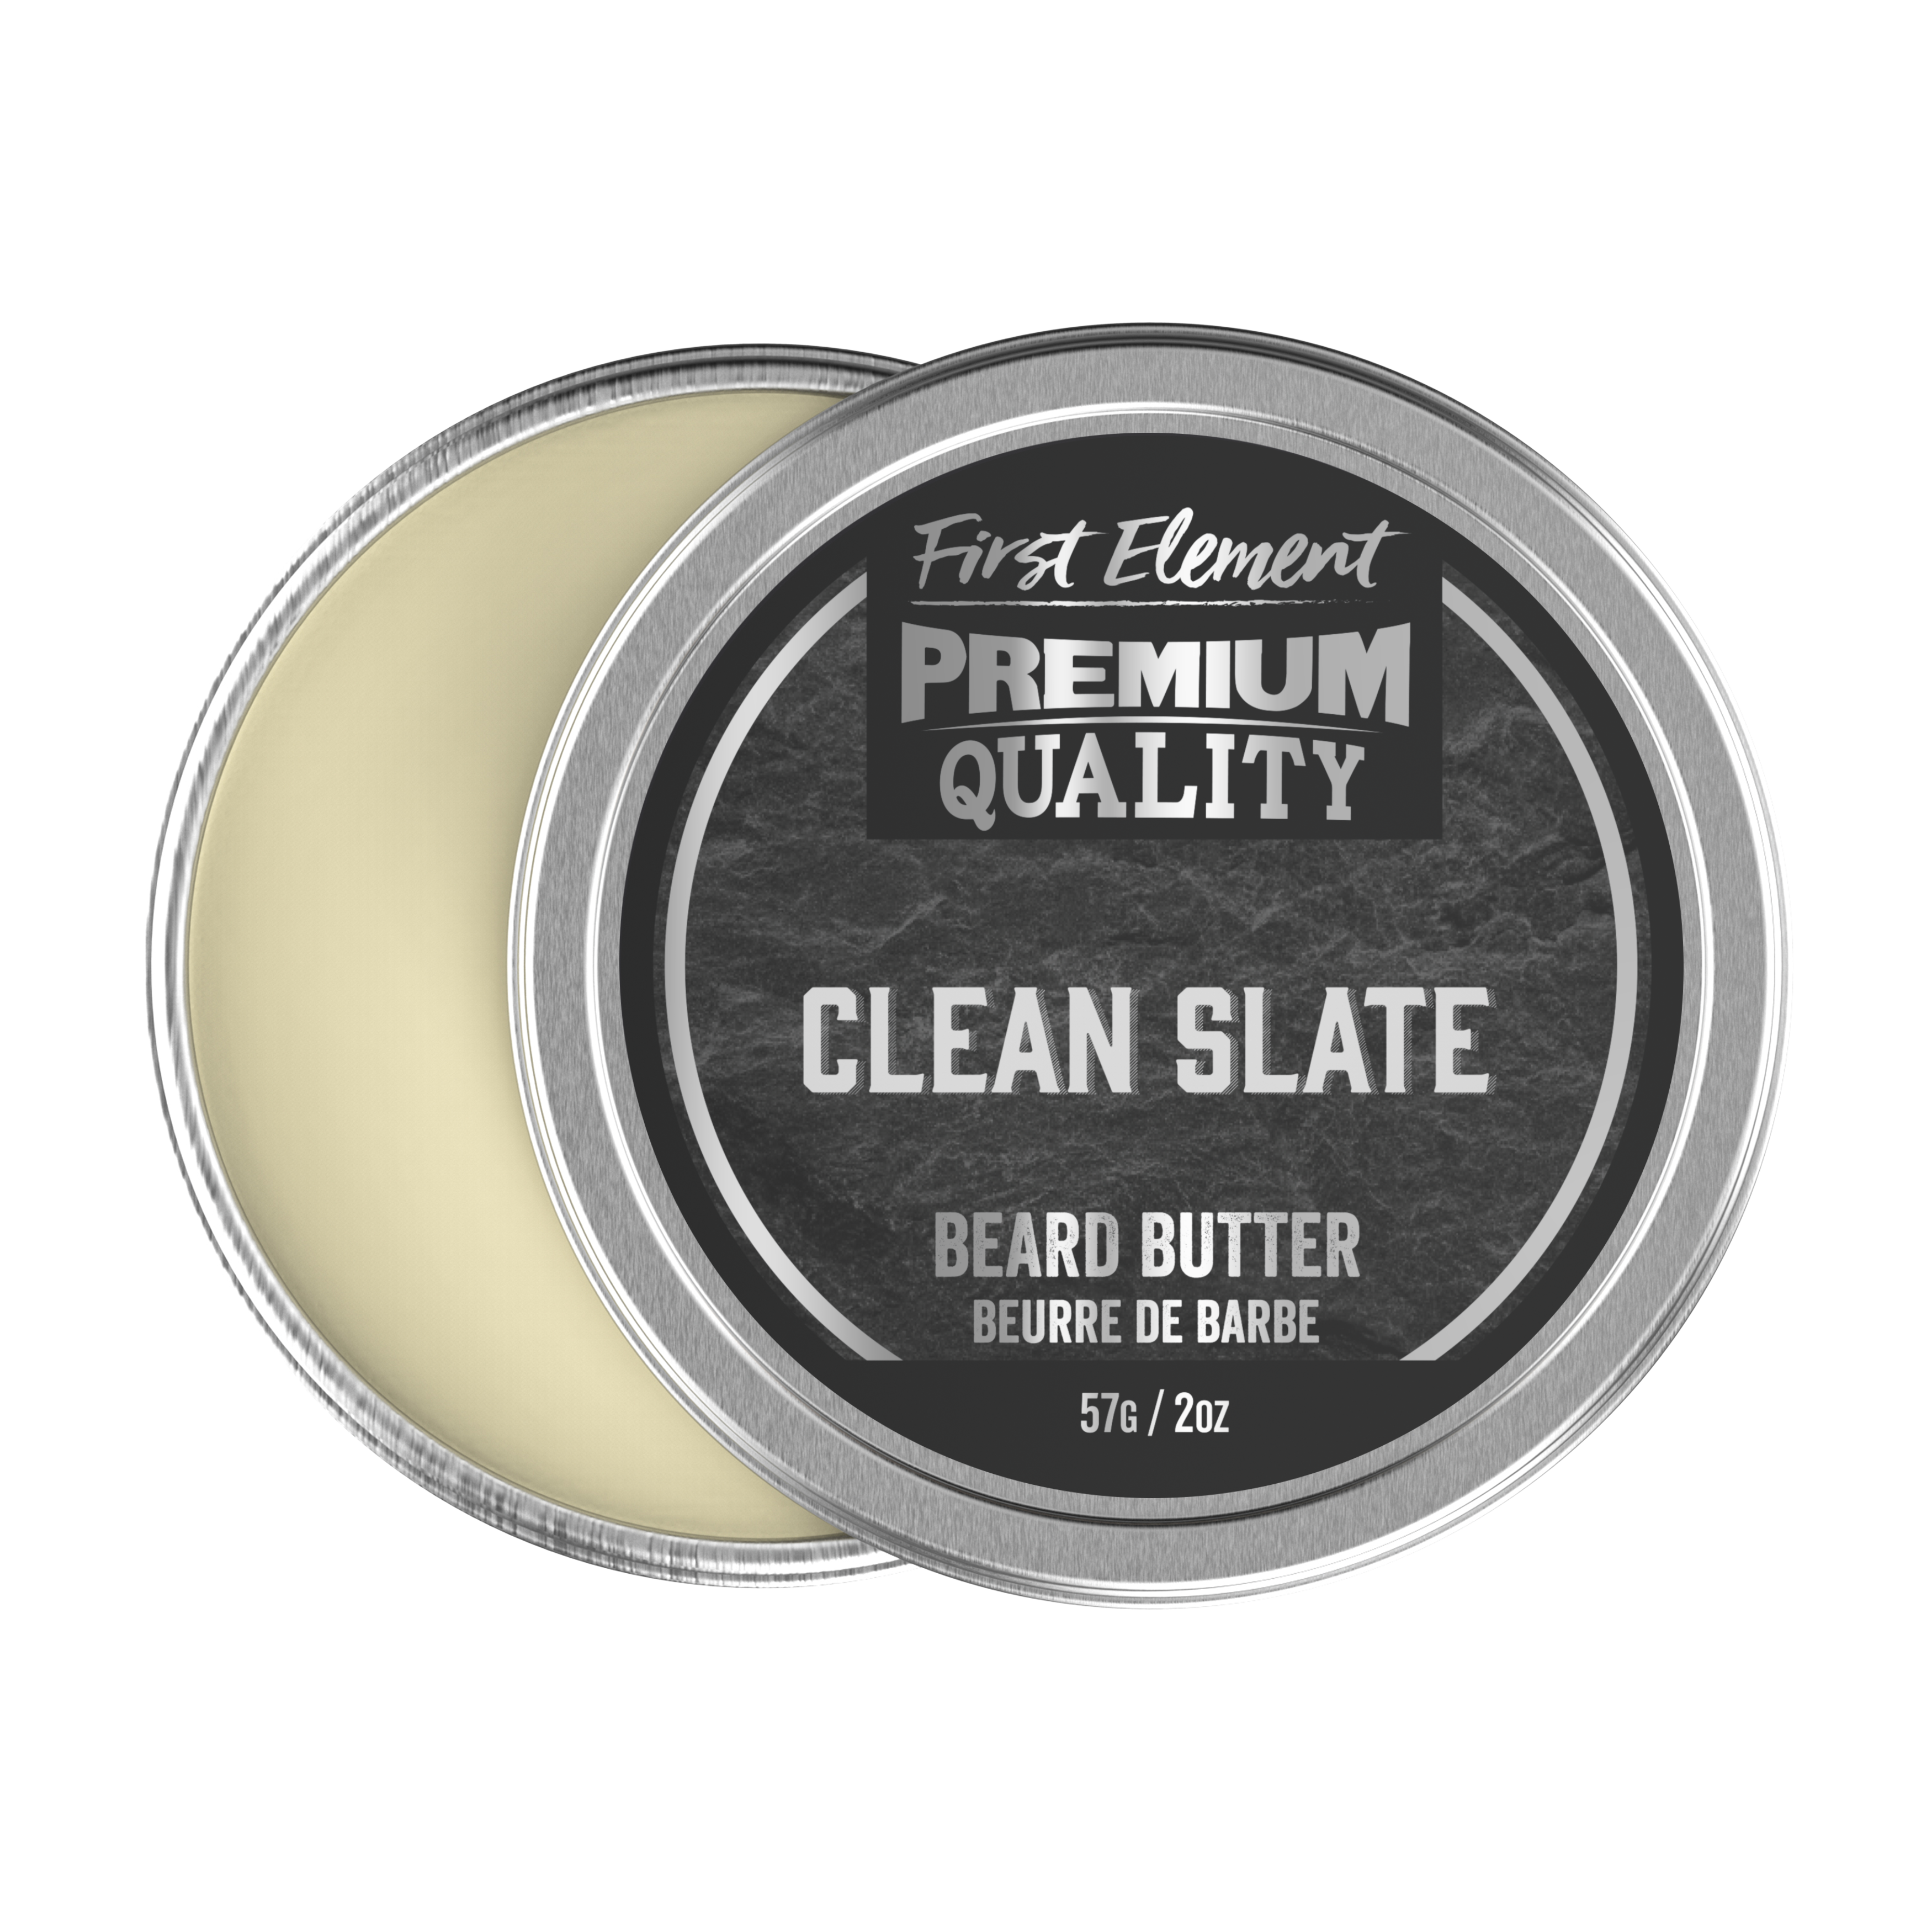 A 2oz metal tin of Clean Slate Beard Butter, handcrafted in small batches in Canada. The tin features a screw-on top with a tamper-evident seal.